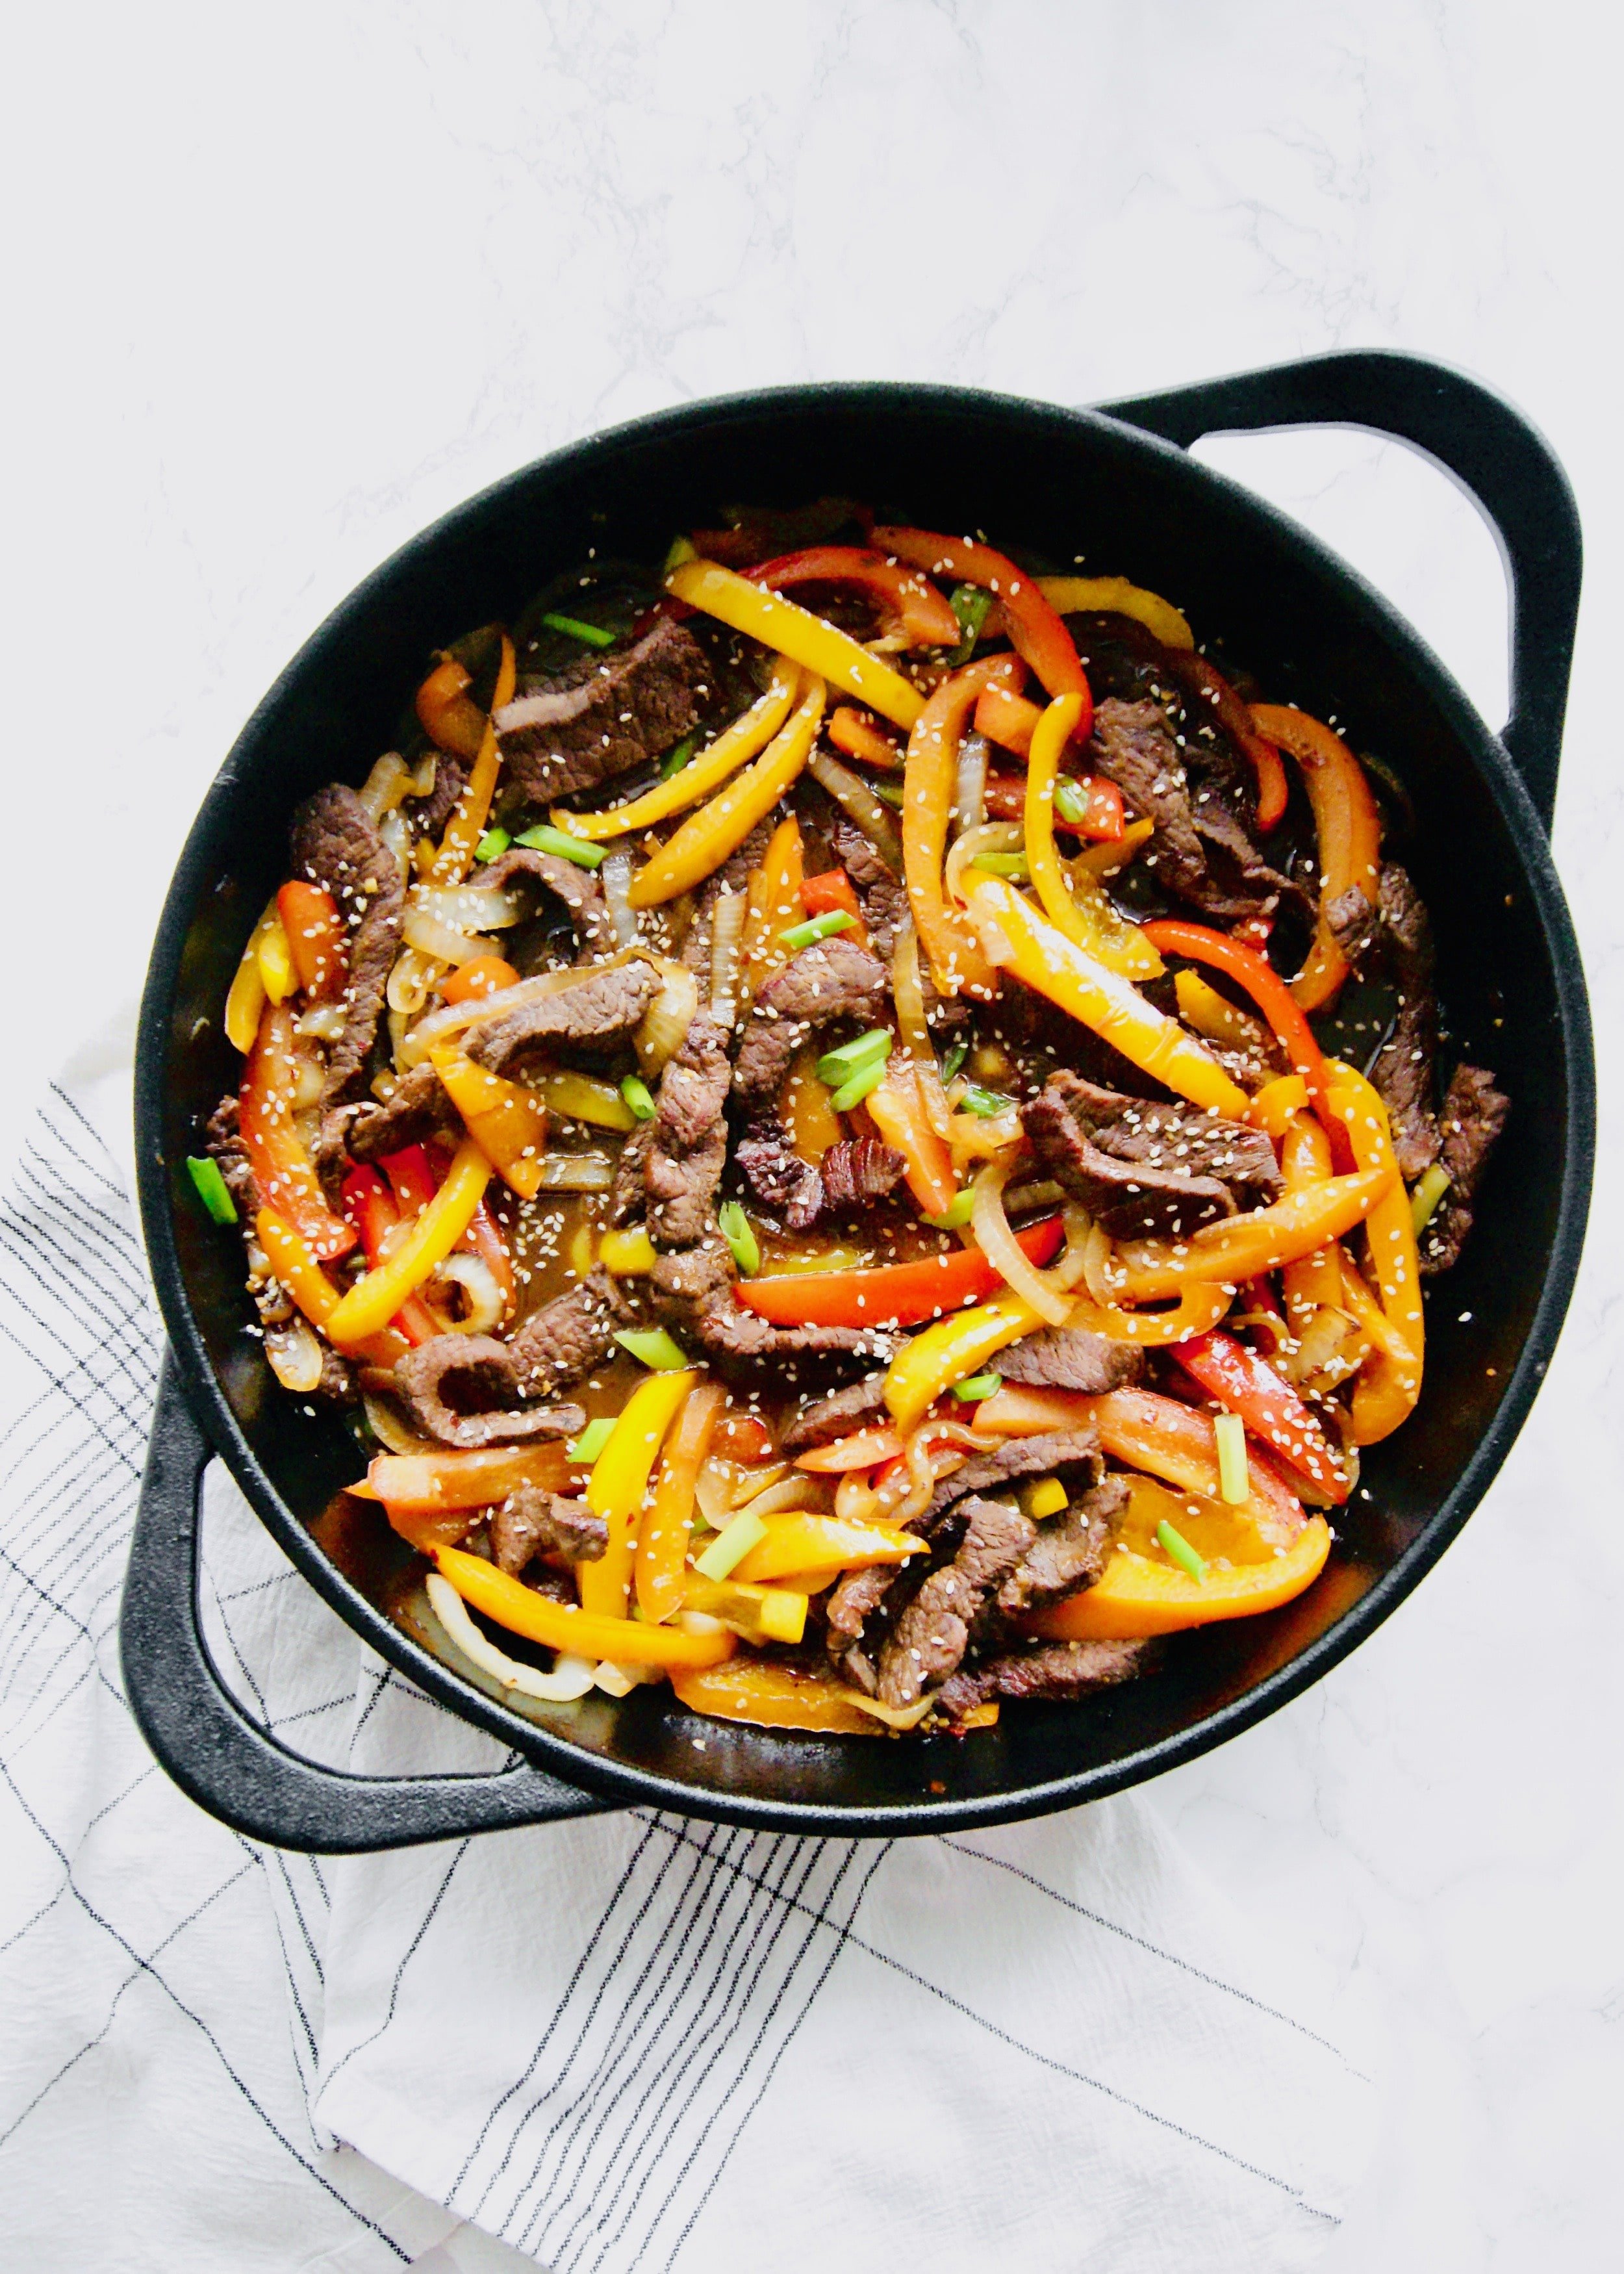 Beef, peppers, and onions in a cast iron skillet